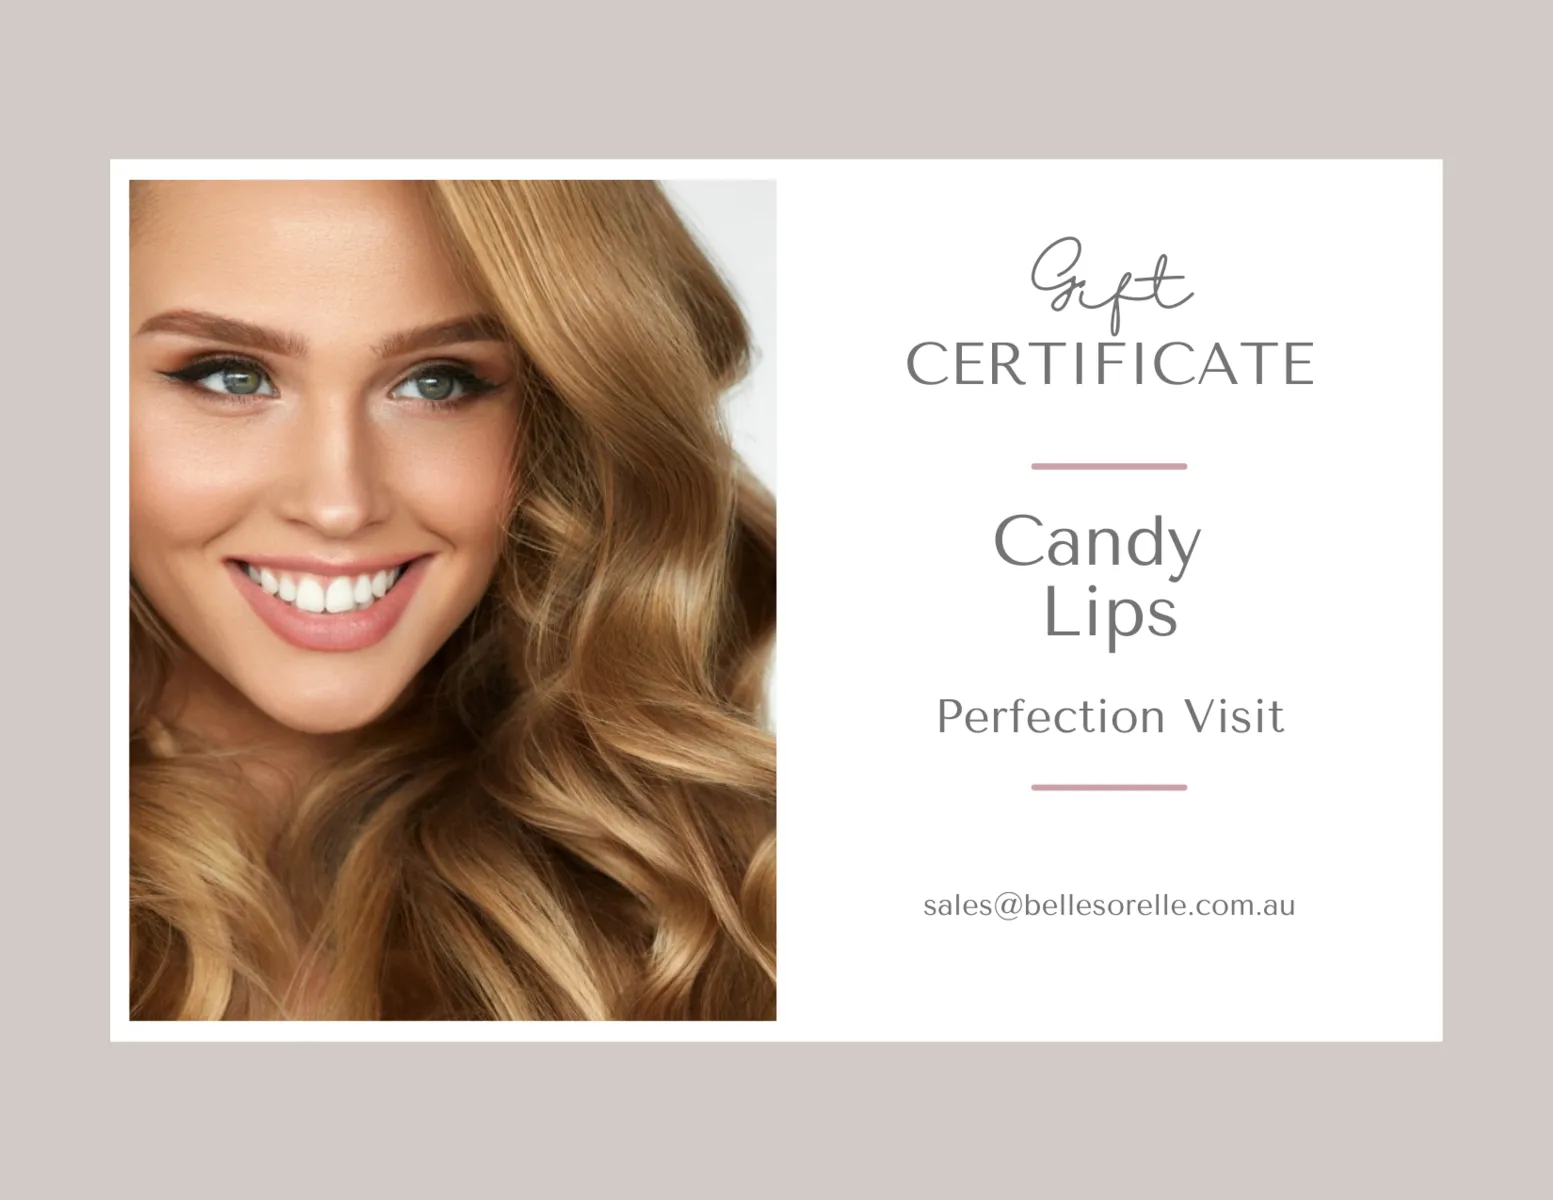 Candy Lips - Perfection Visit